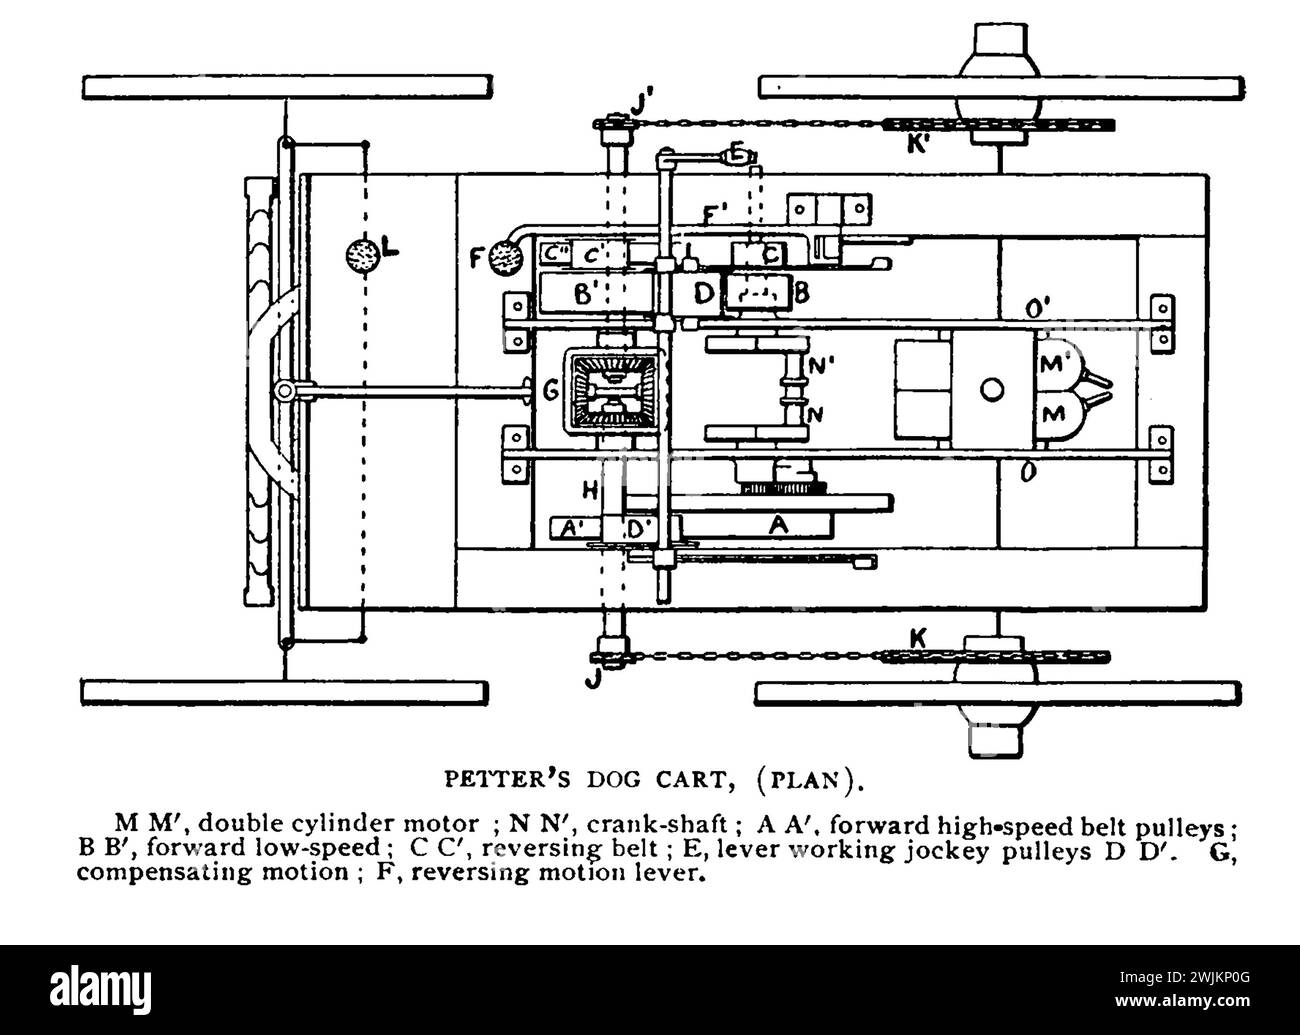 Petter's Dog Cart - plan M M', double cylinder motor ; N N', crank-shaft ; A A', forward high-speed belt pulleys ; B B', forward low-speed ; C C, reversing belt ; E, lever working jockey pulleys D D'. G, compensating motion ; F, reversing motion lever. from the Article THE PRESENT STATUS OF THE HORSELESS-CARRIAGE INDUSTRY. By W. Worby Beaumont. from The Engineering Magazine Devoted to Industrial Progress Volume XI October 1897 The Engineering Magazine Co Stock Photo